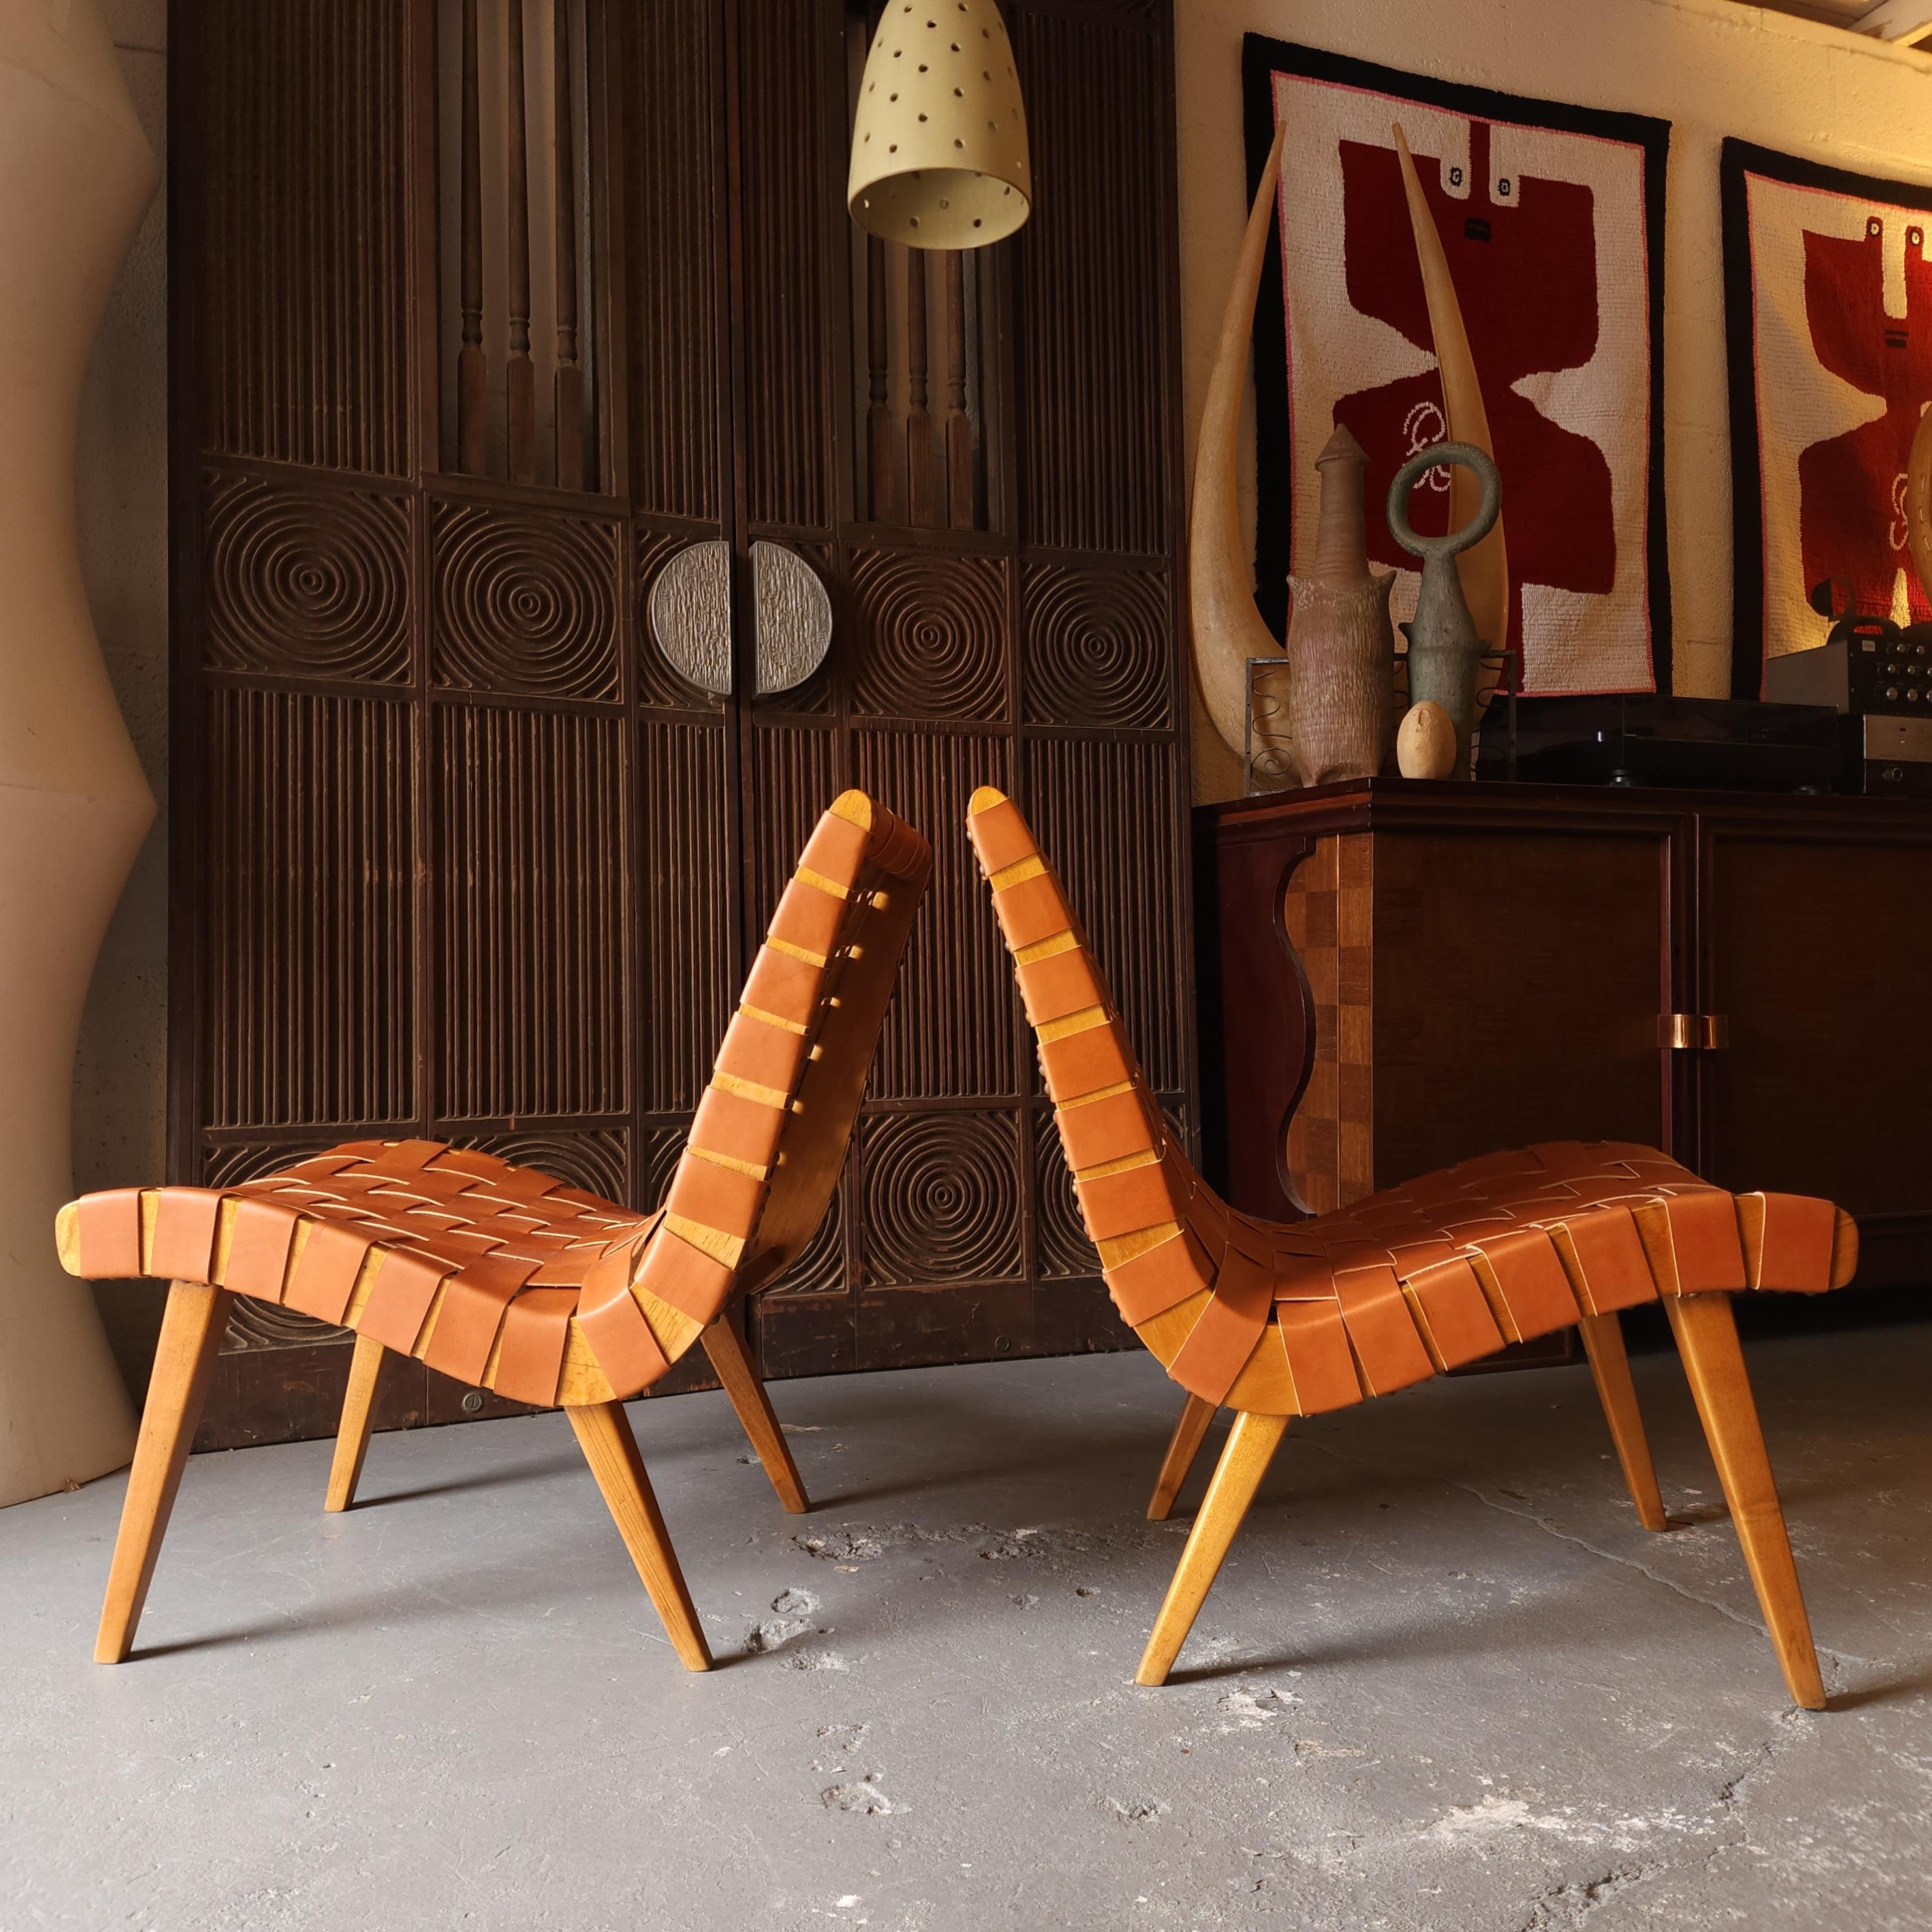 Incredible pair of Jeans Risom 654w chairs designed in 1941. Beautiful curves, sleek design, buttery leather, and patinated wood combine to create such a warm and exquisite feeling in these perfectly ergonomic classics. These have been restrapped